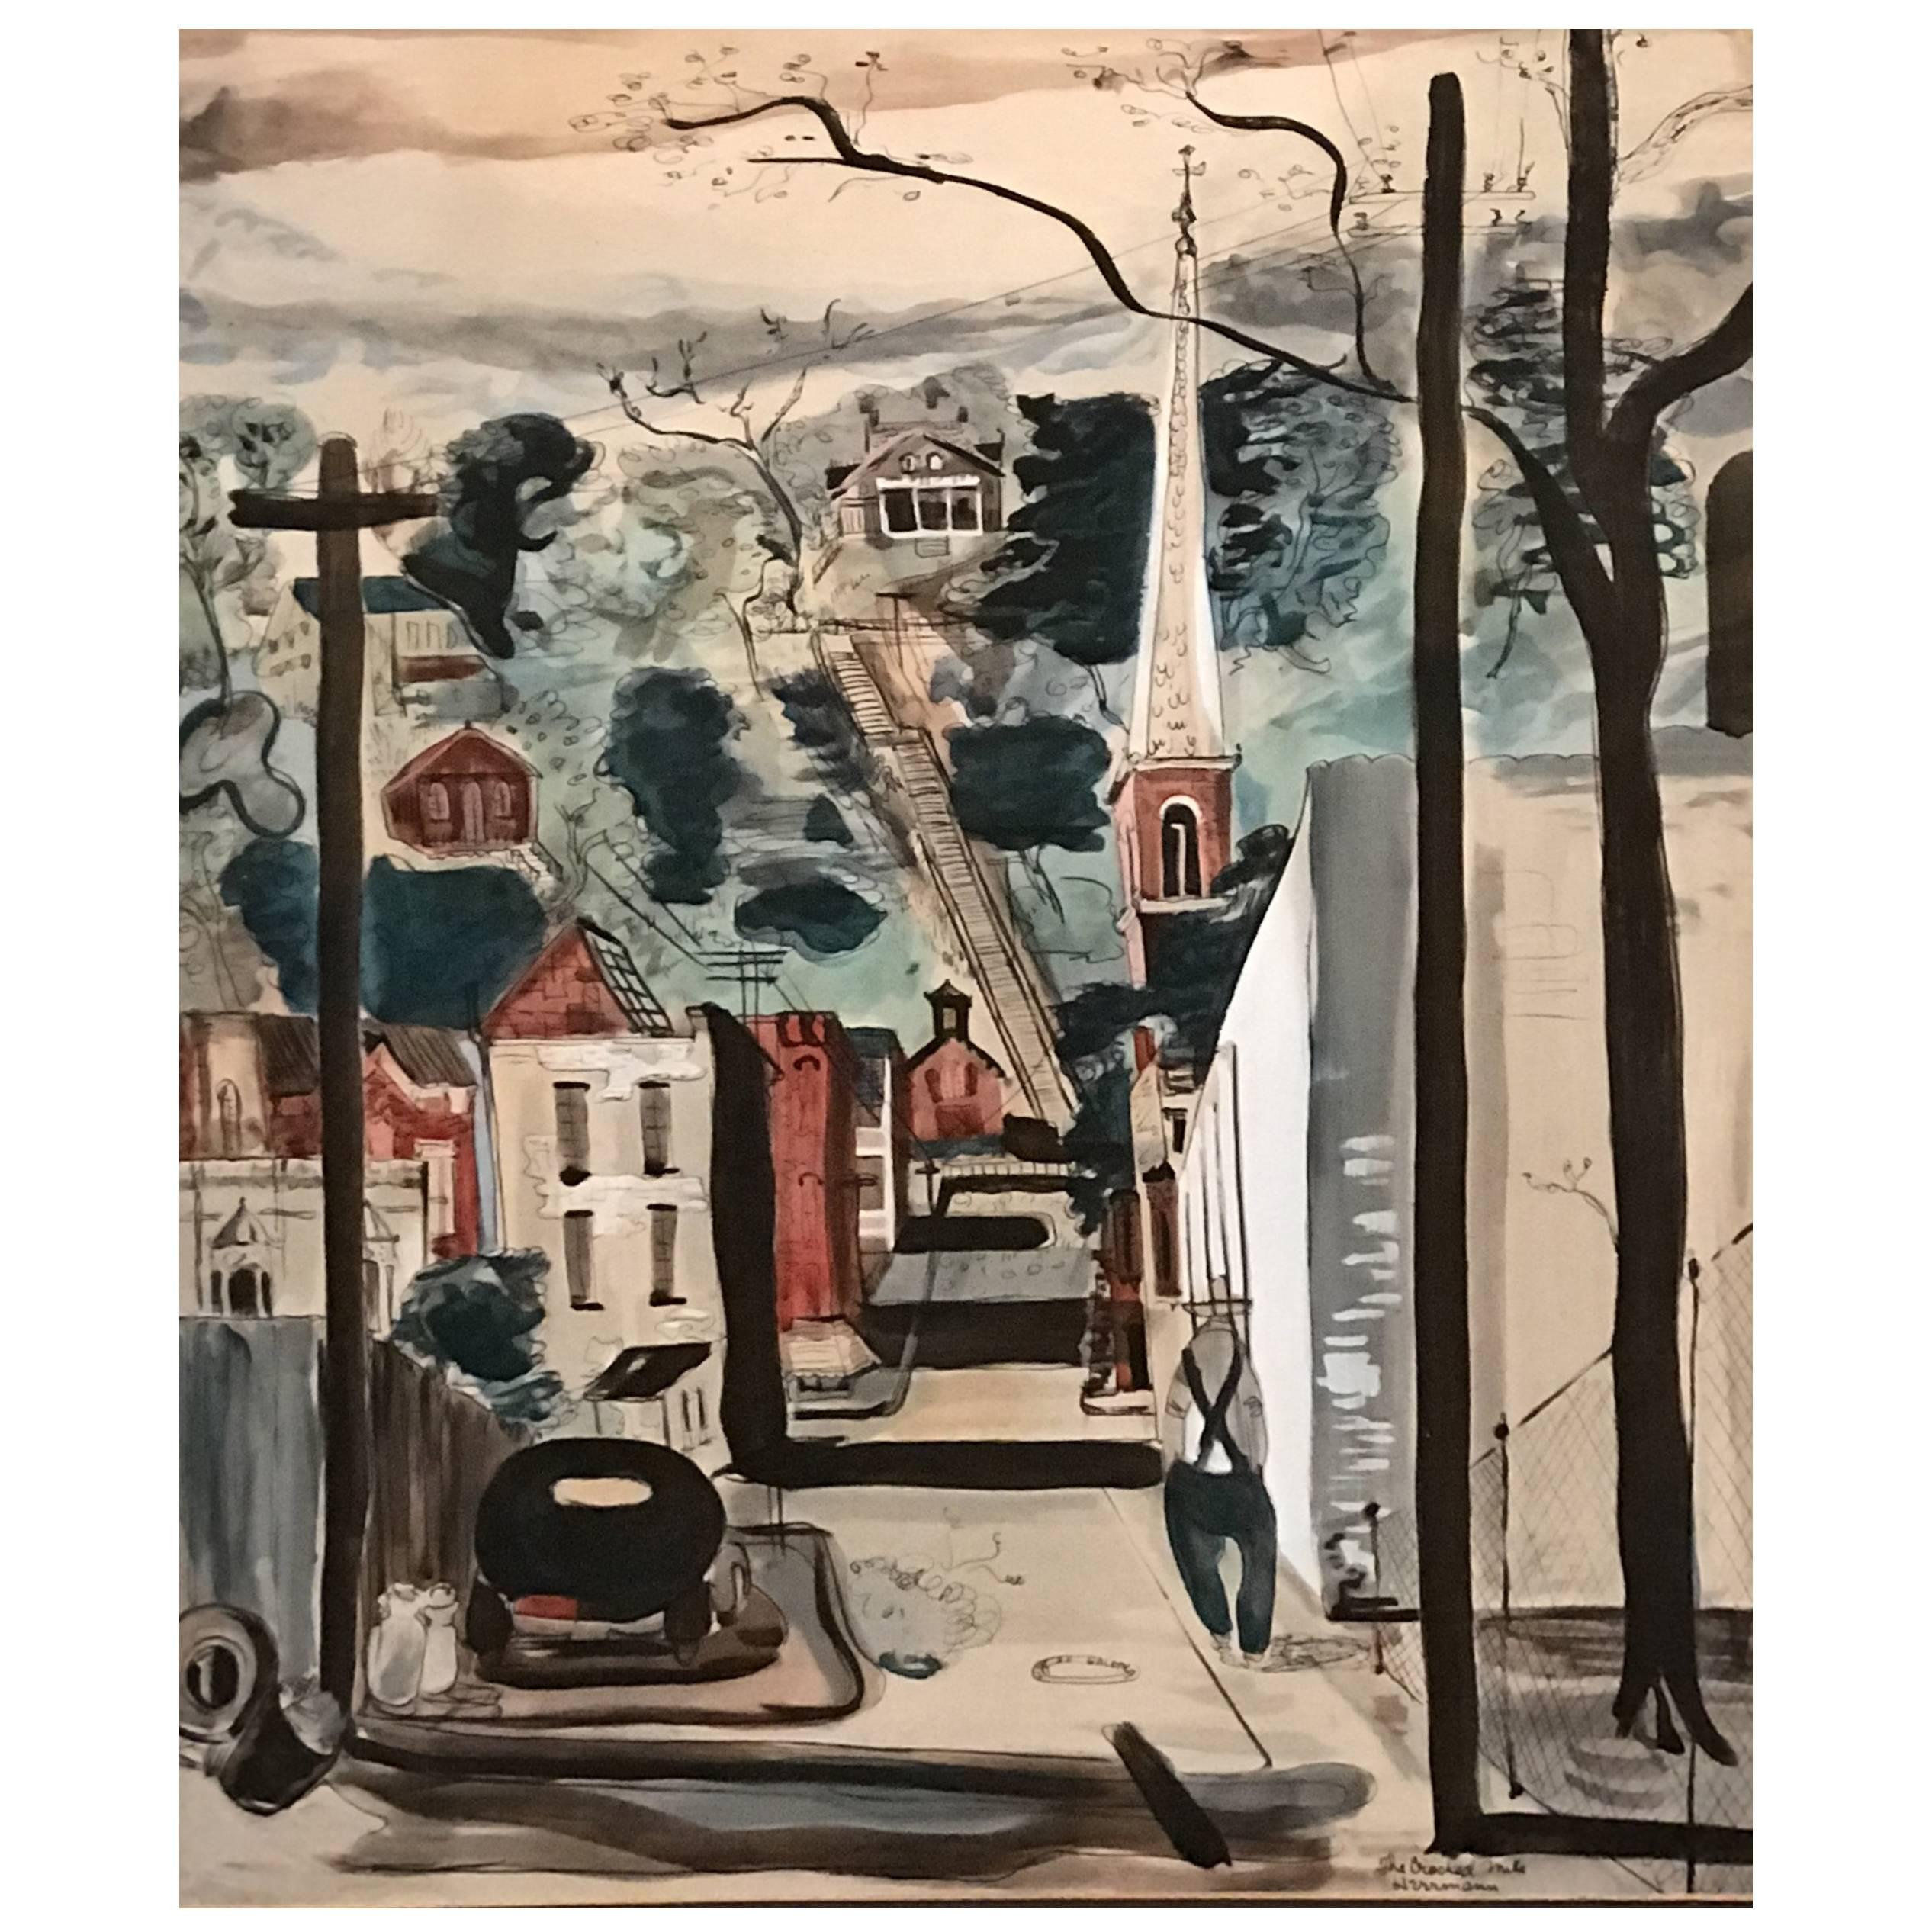 Edward Herrmann Hand Colored Print “the Crooked Mile, ” Gallenas, Illinois